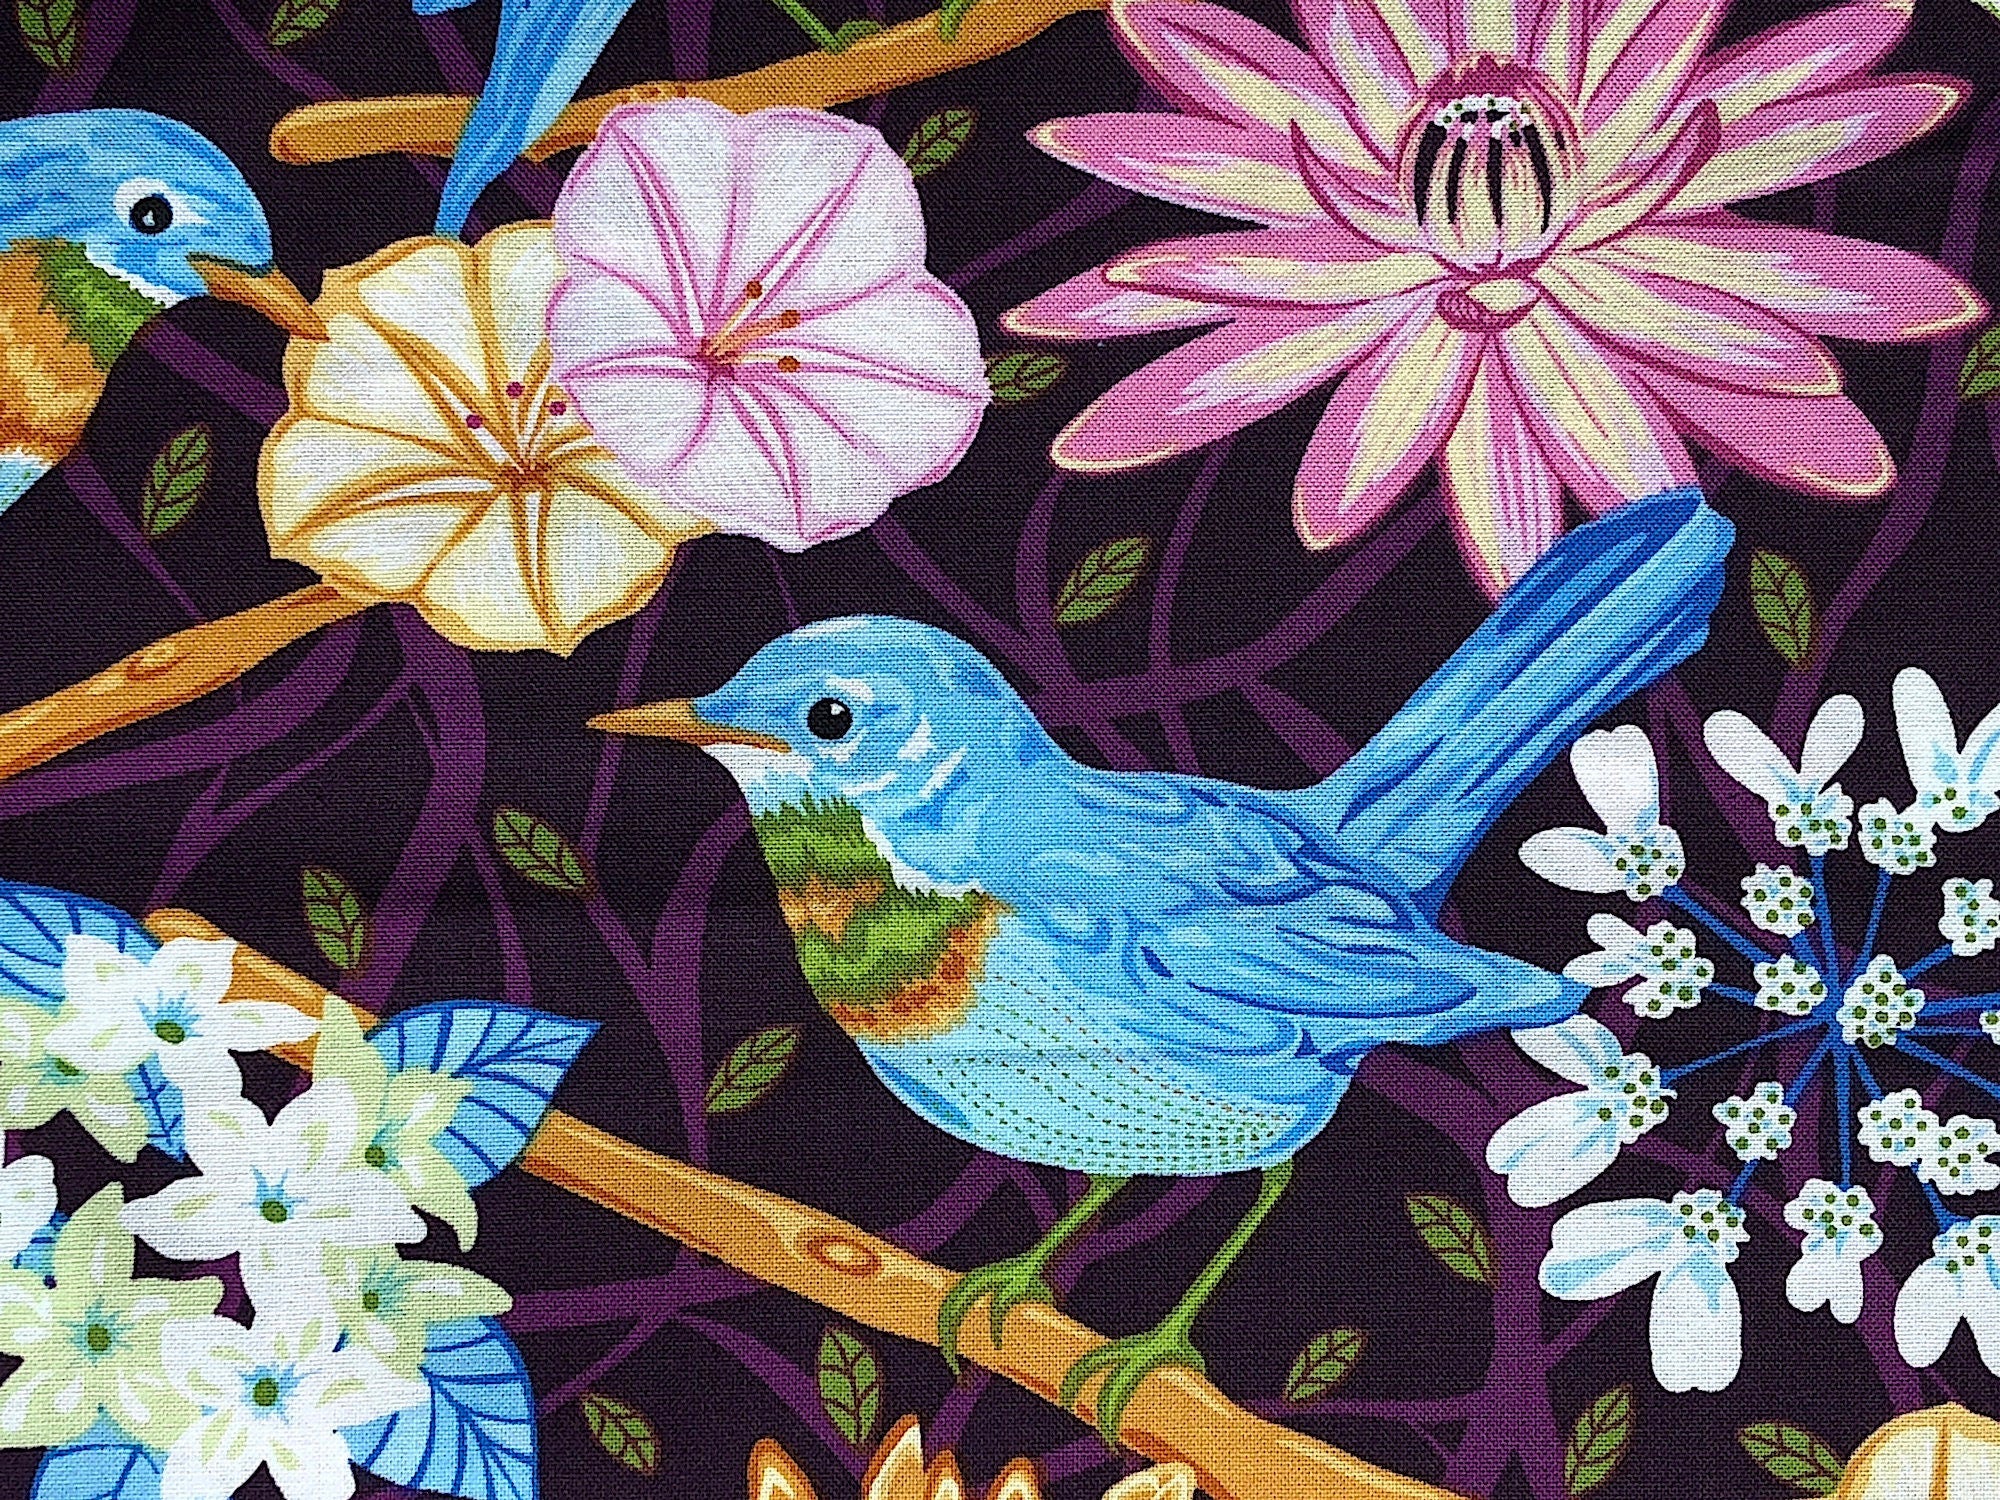 Close up of a blue bird standing on a branch surrounded by flowers.